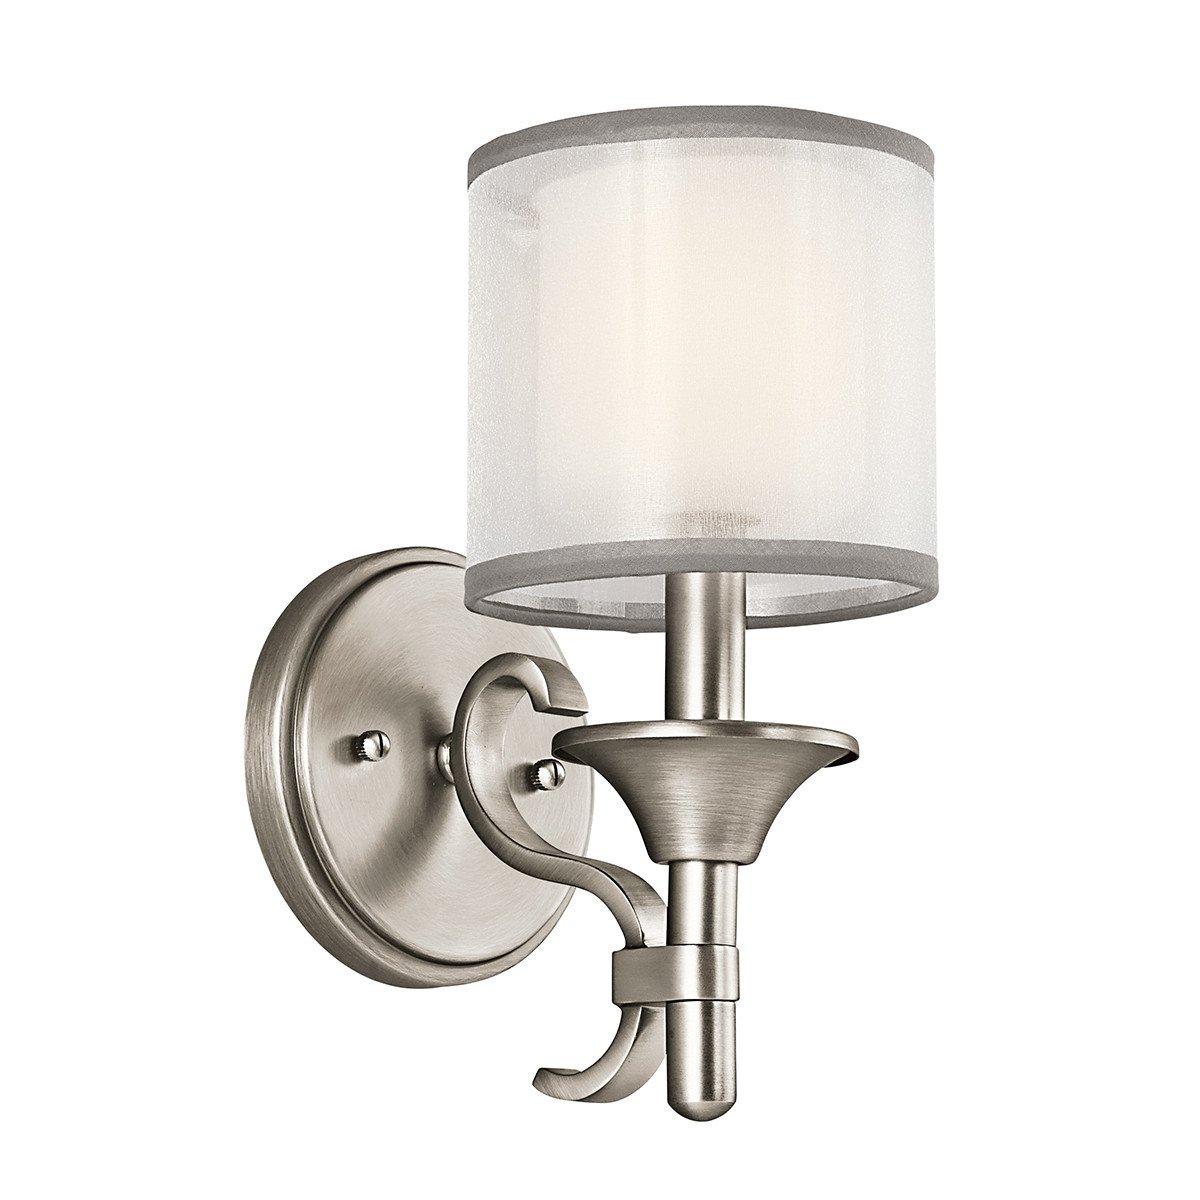 Lacey 1 Light Wall Light Antique Pewter E14